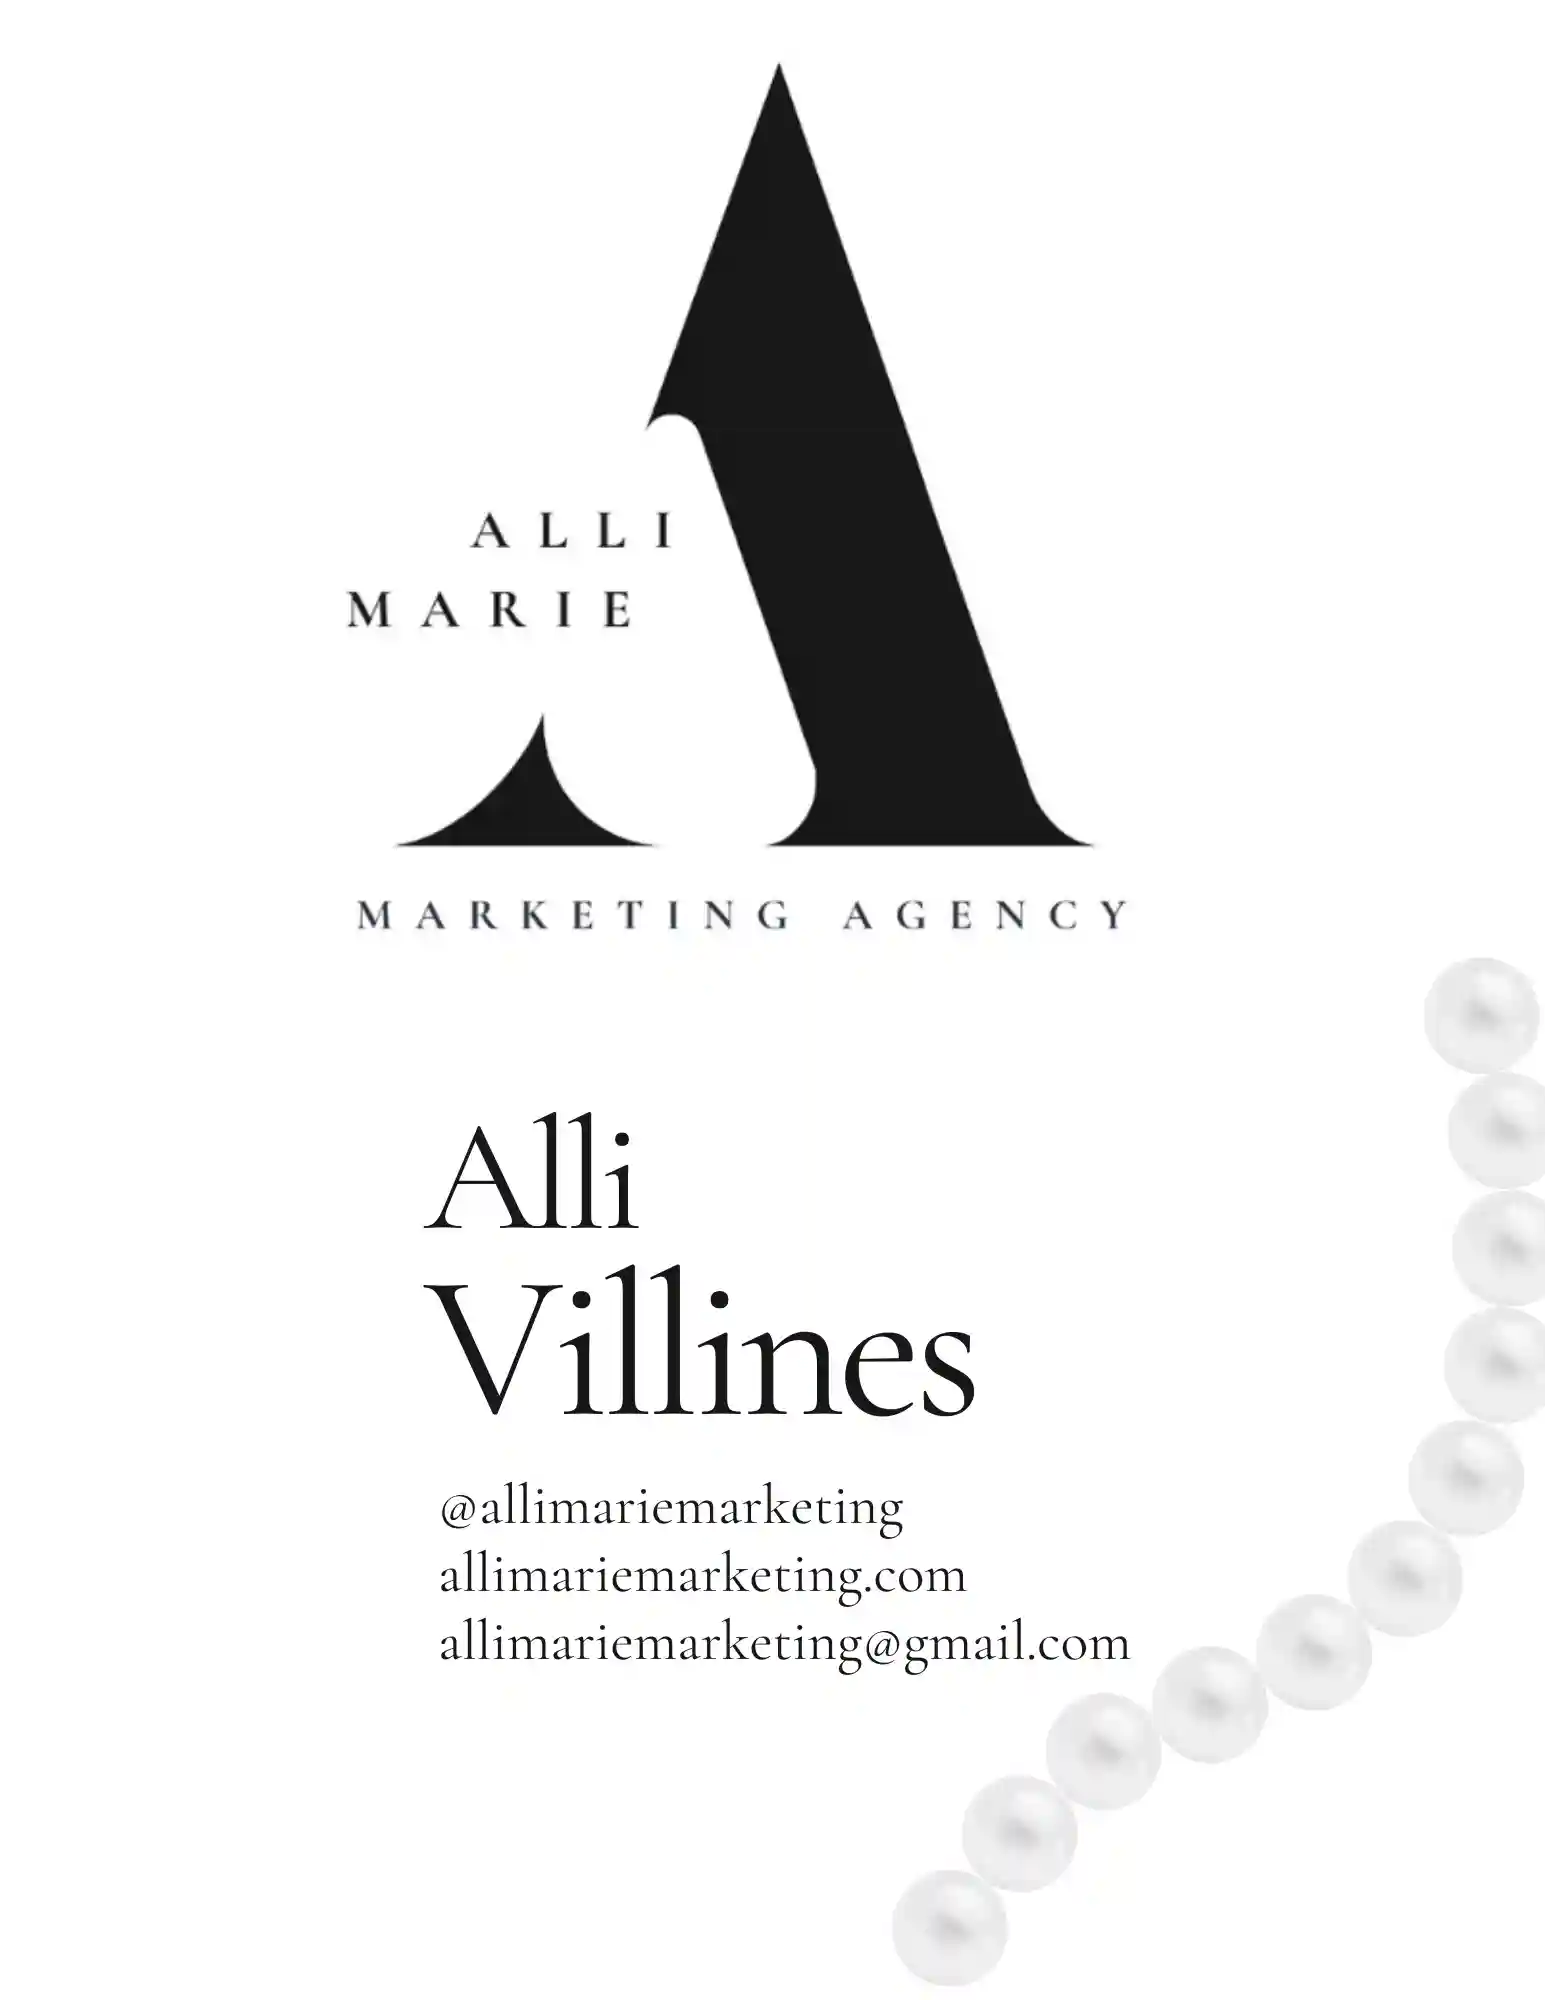 contact alli marie